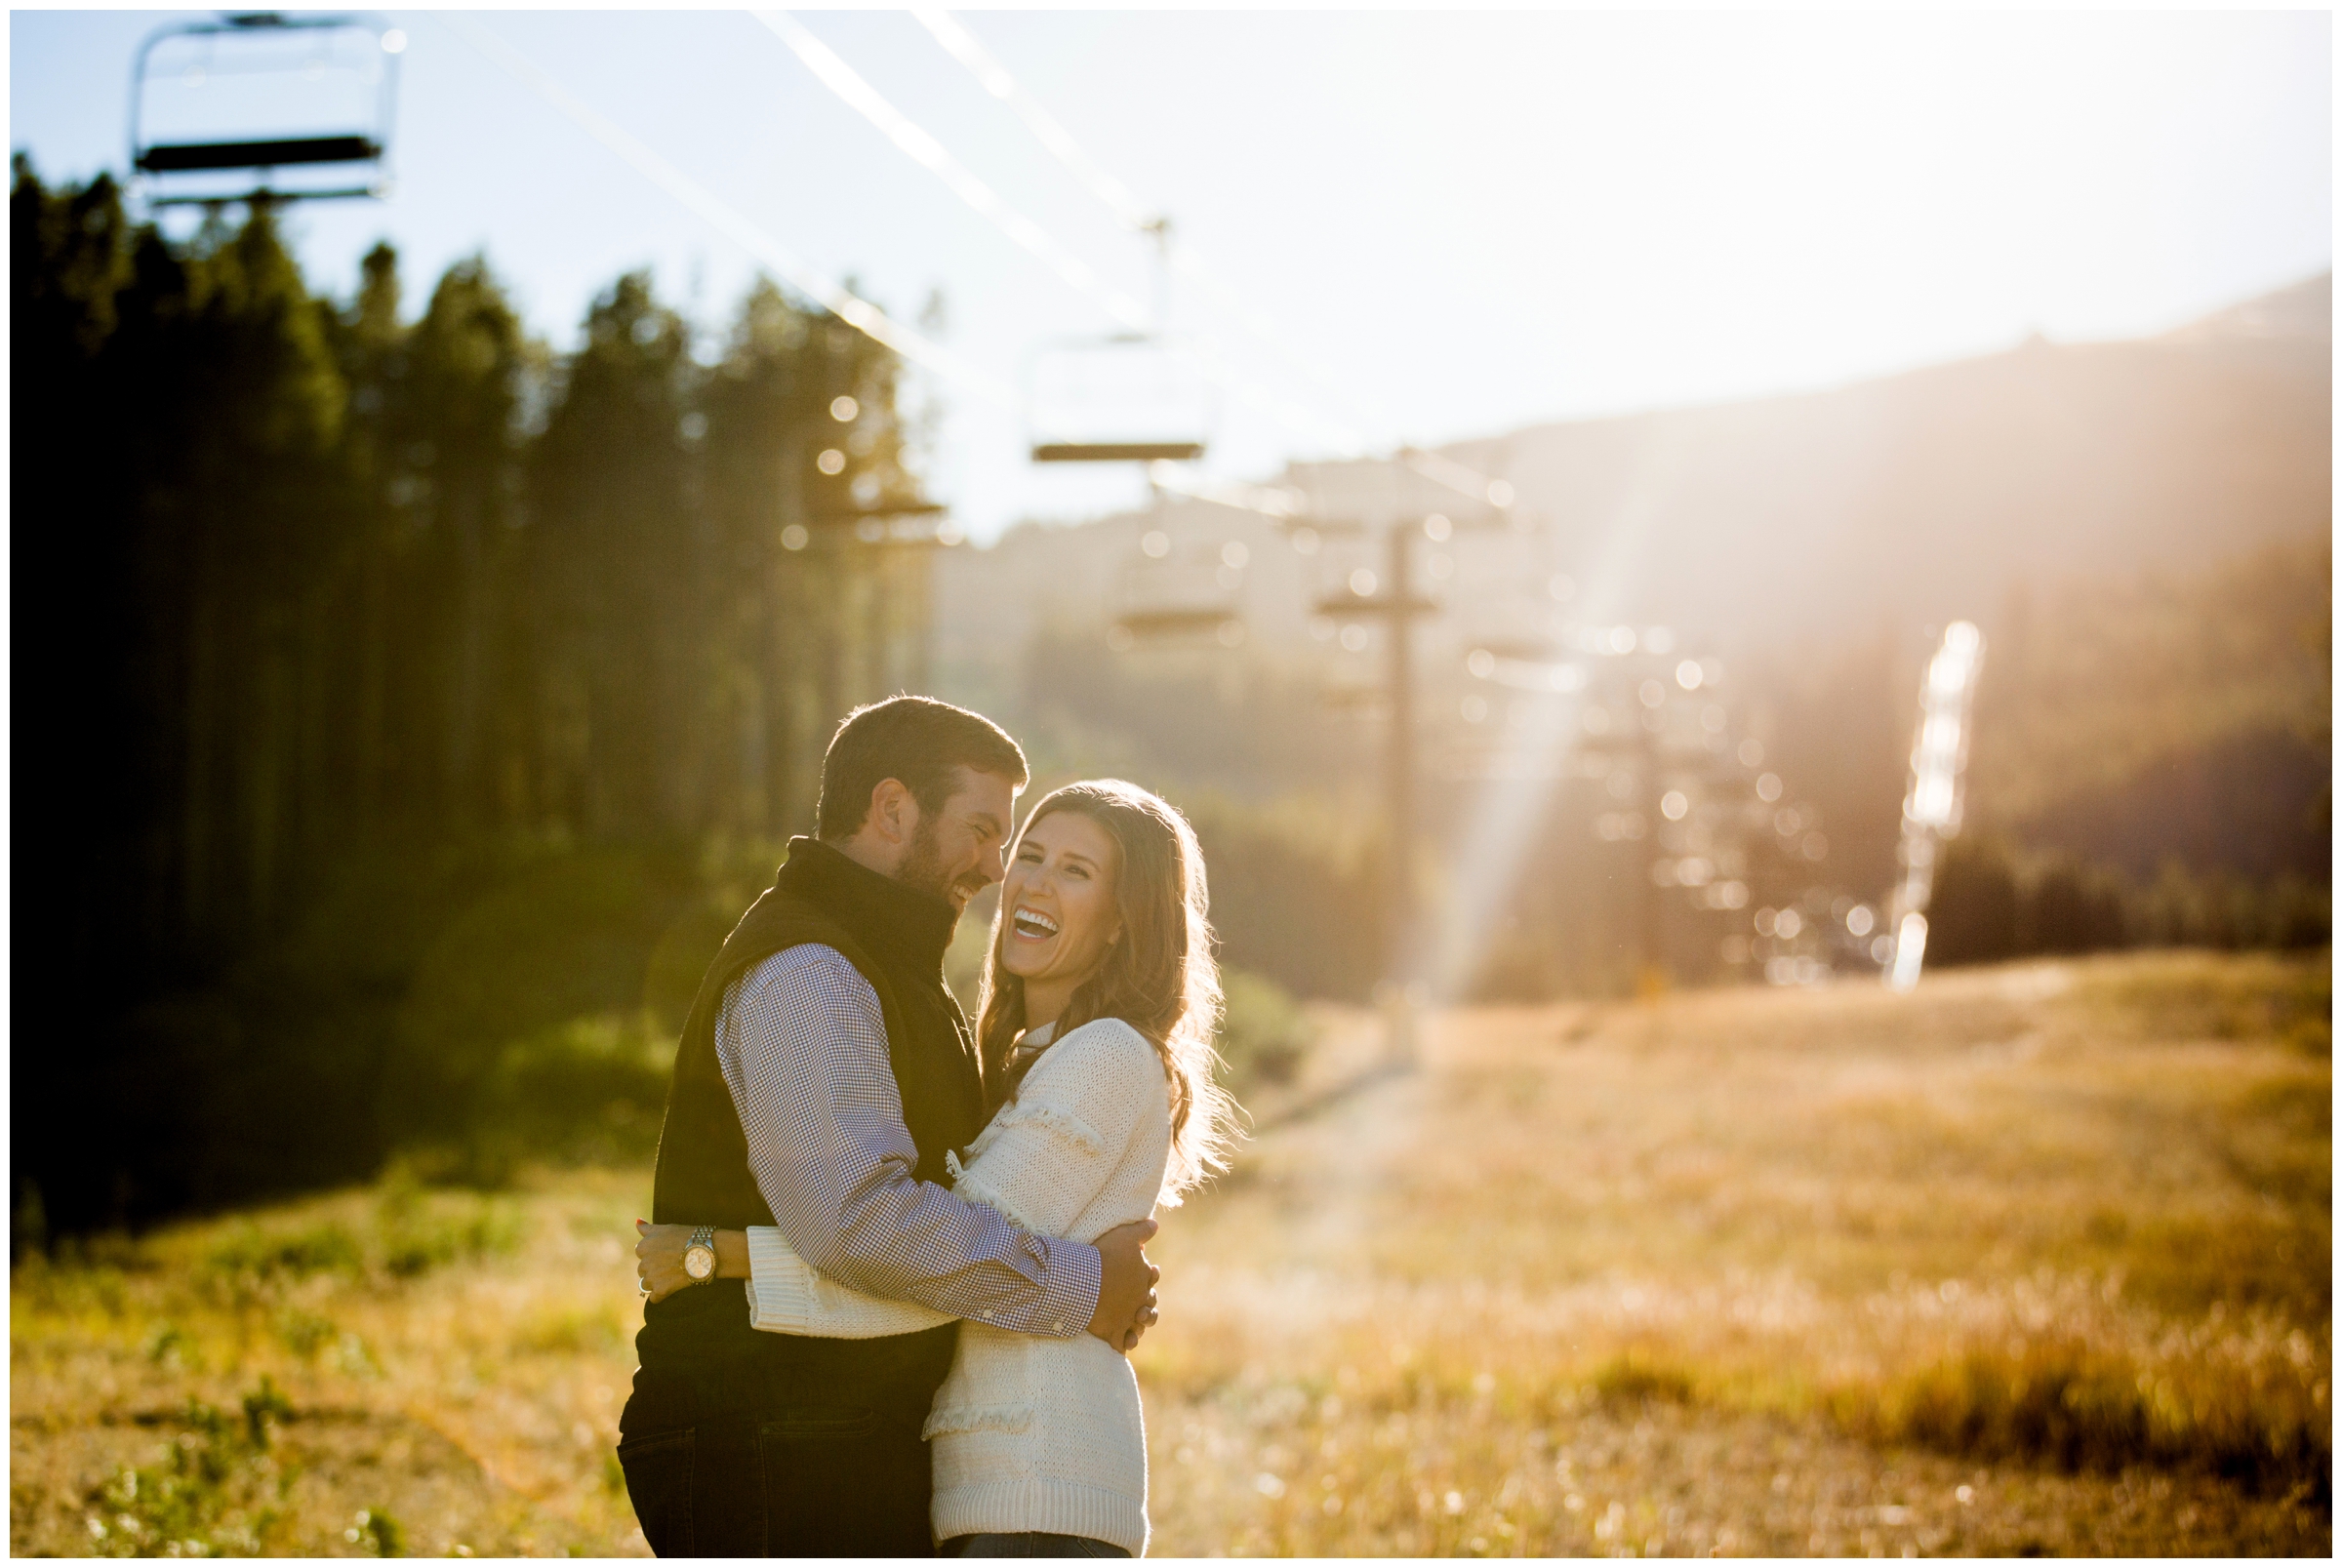 woman laughing during Breckenridge Colorado engagement photographs at ski resort with chairlifts in background